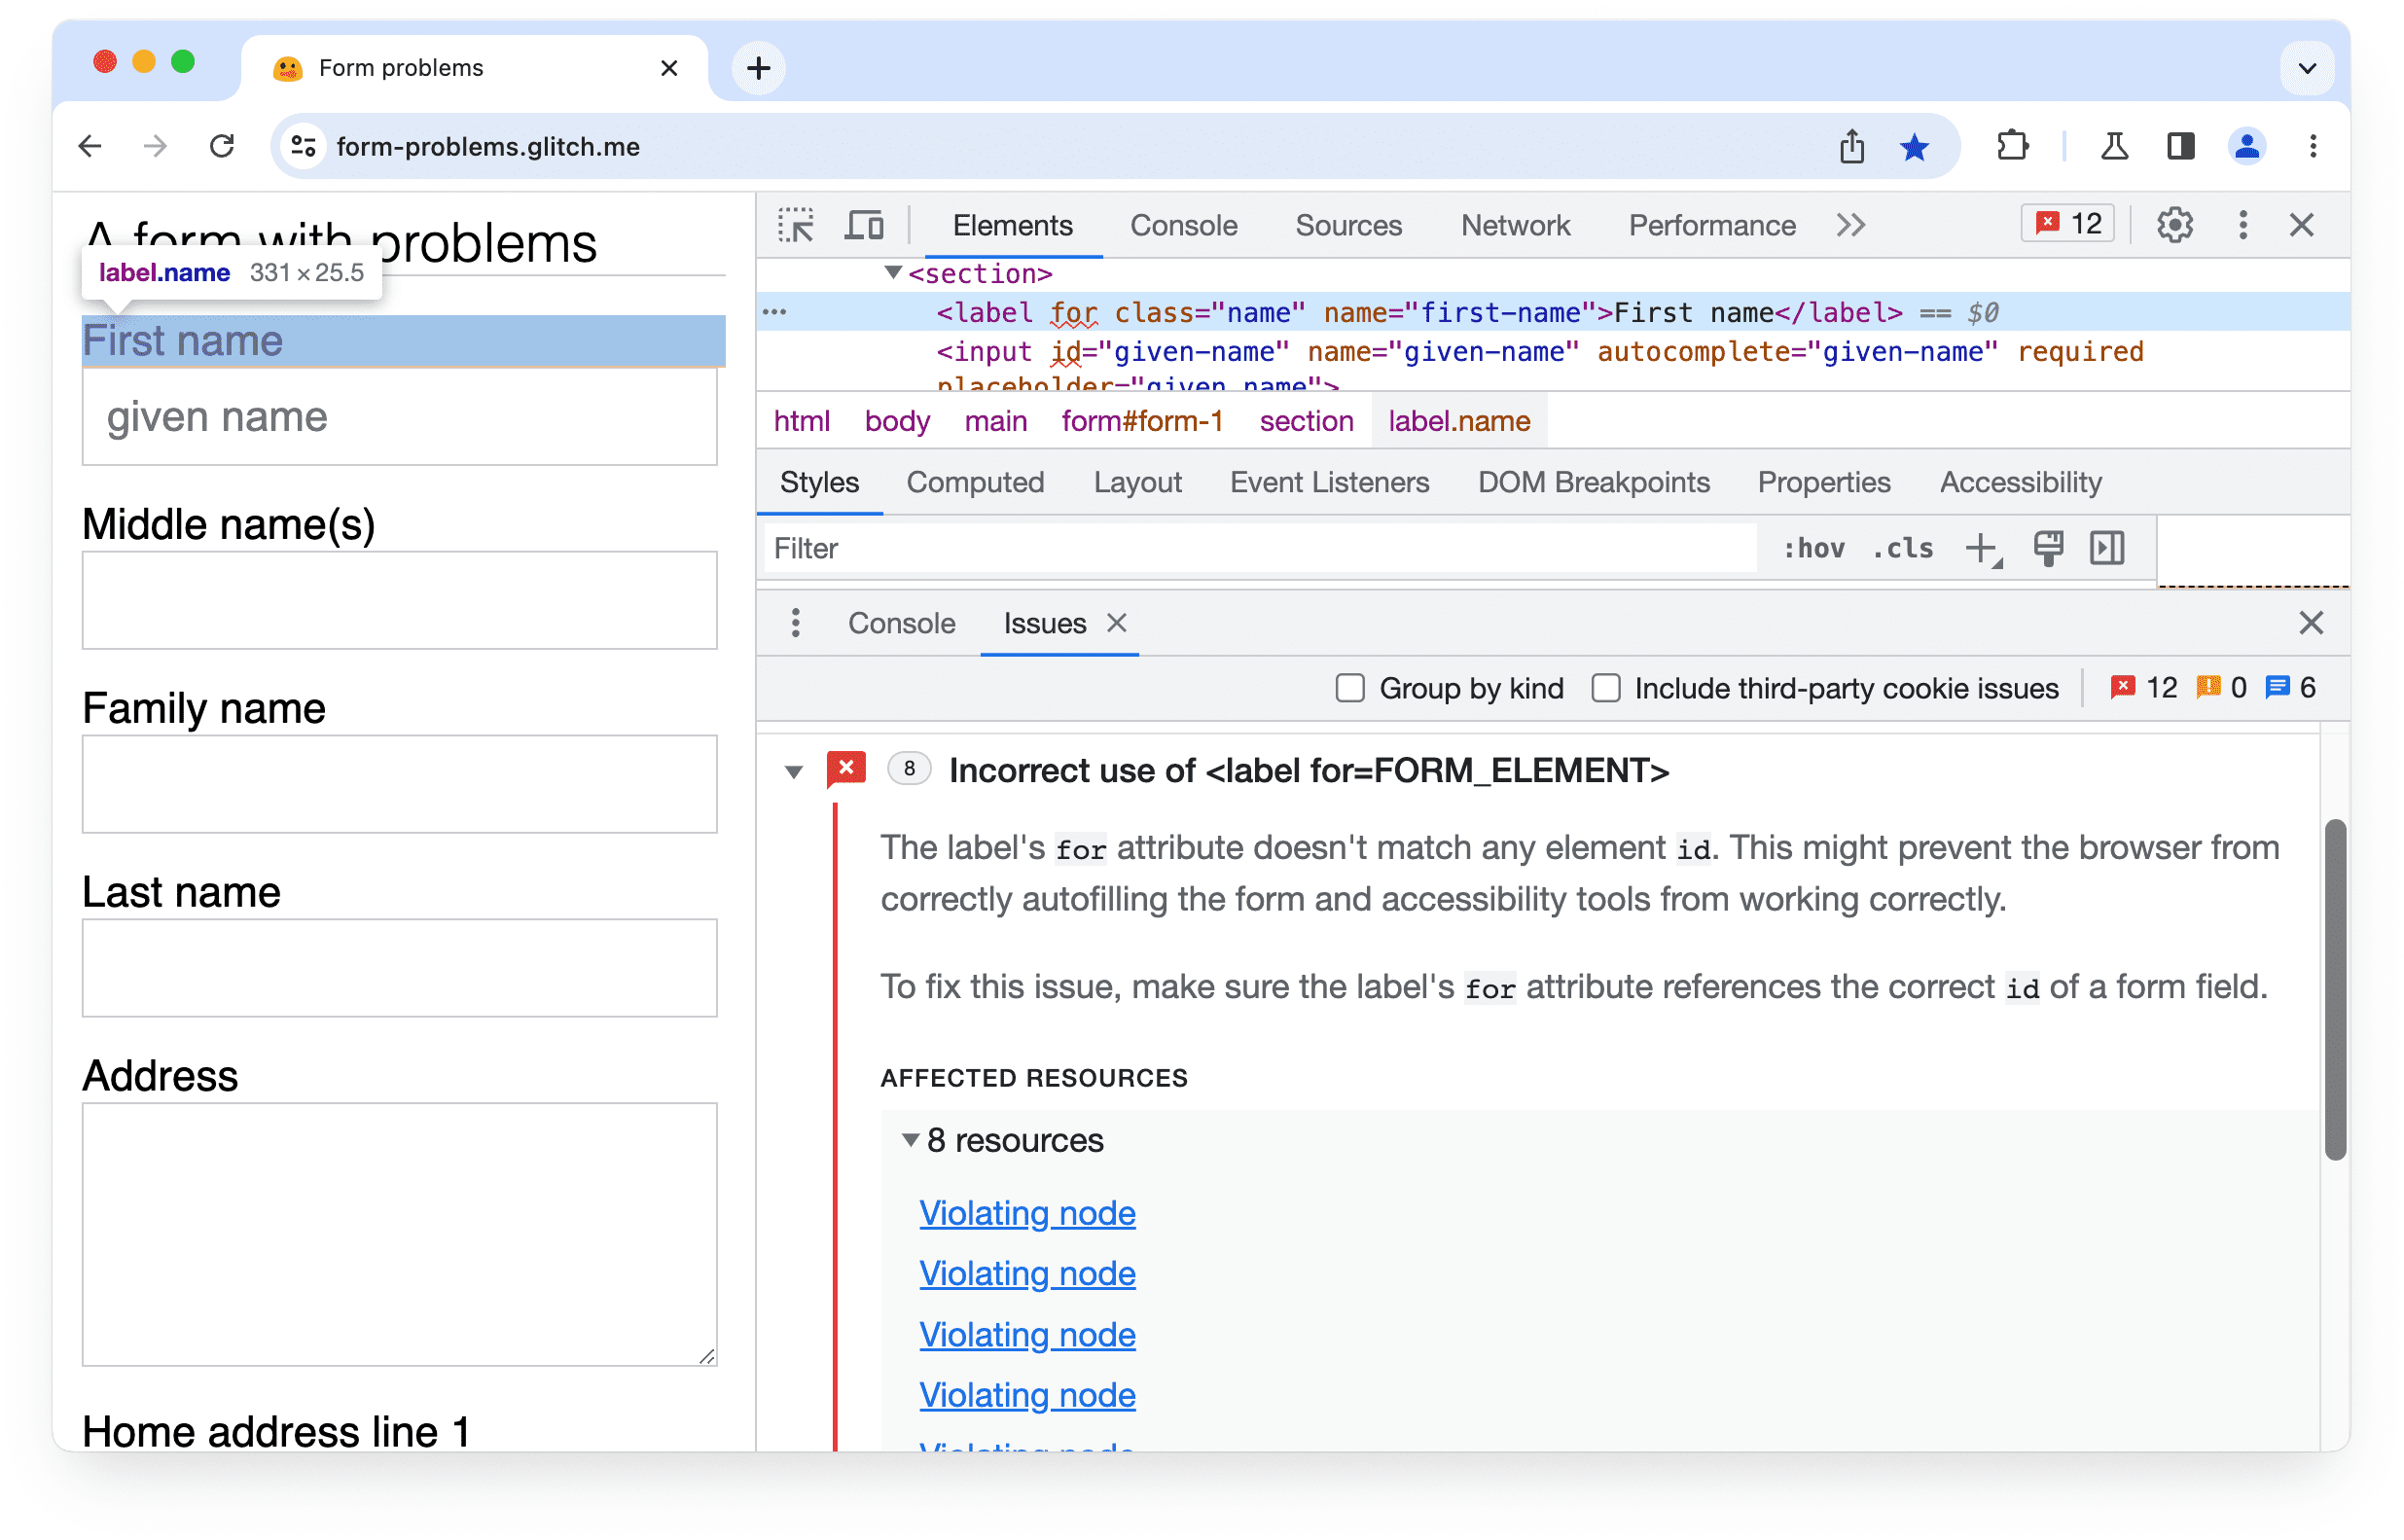 Expanded issue in
Chrome DevTools: Incorrect use of label for attribute.